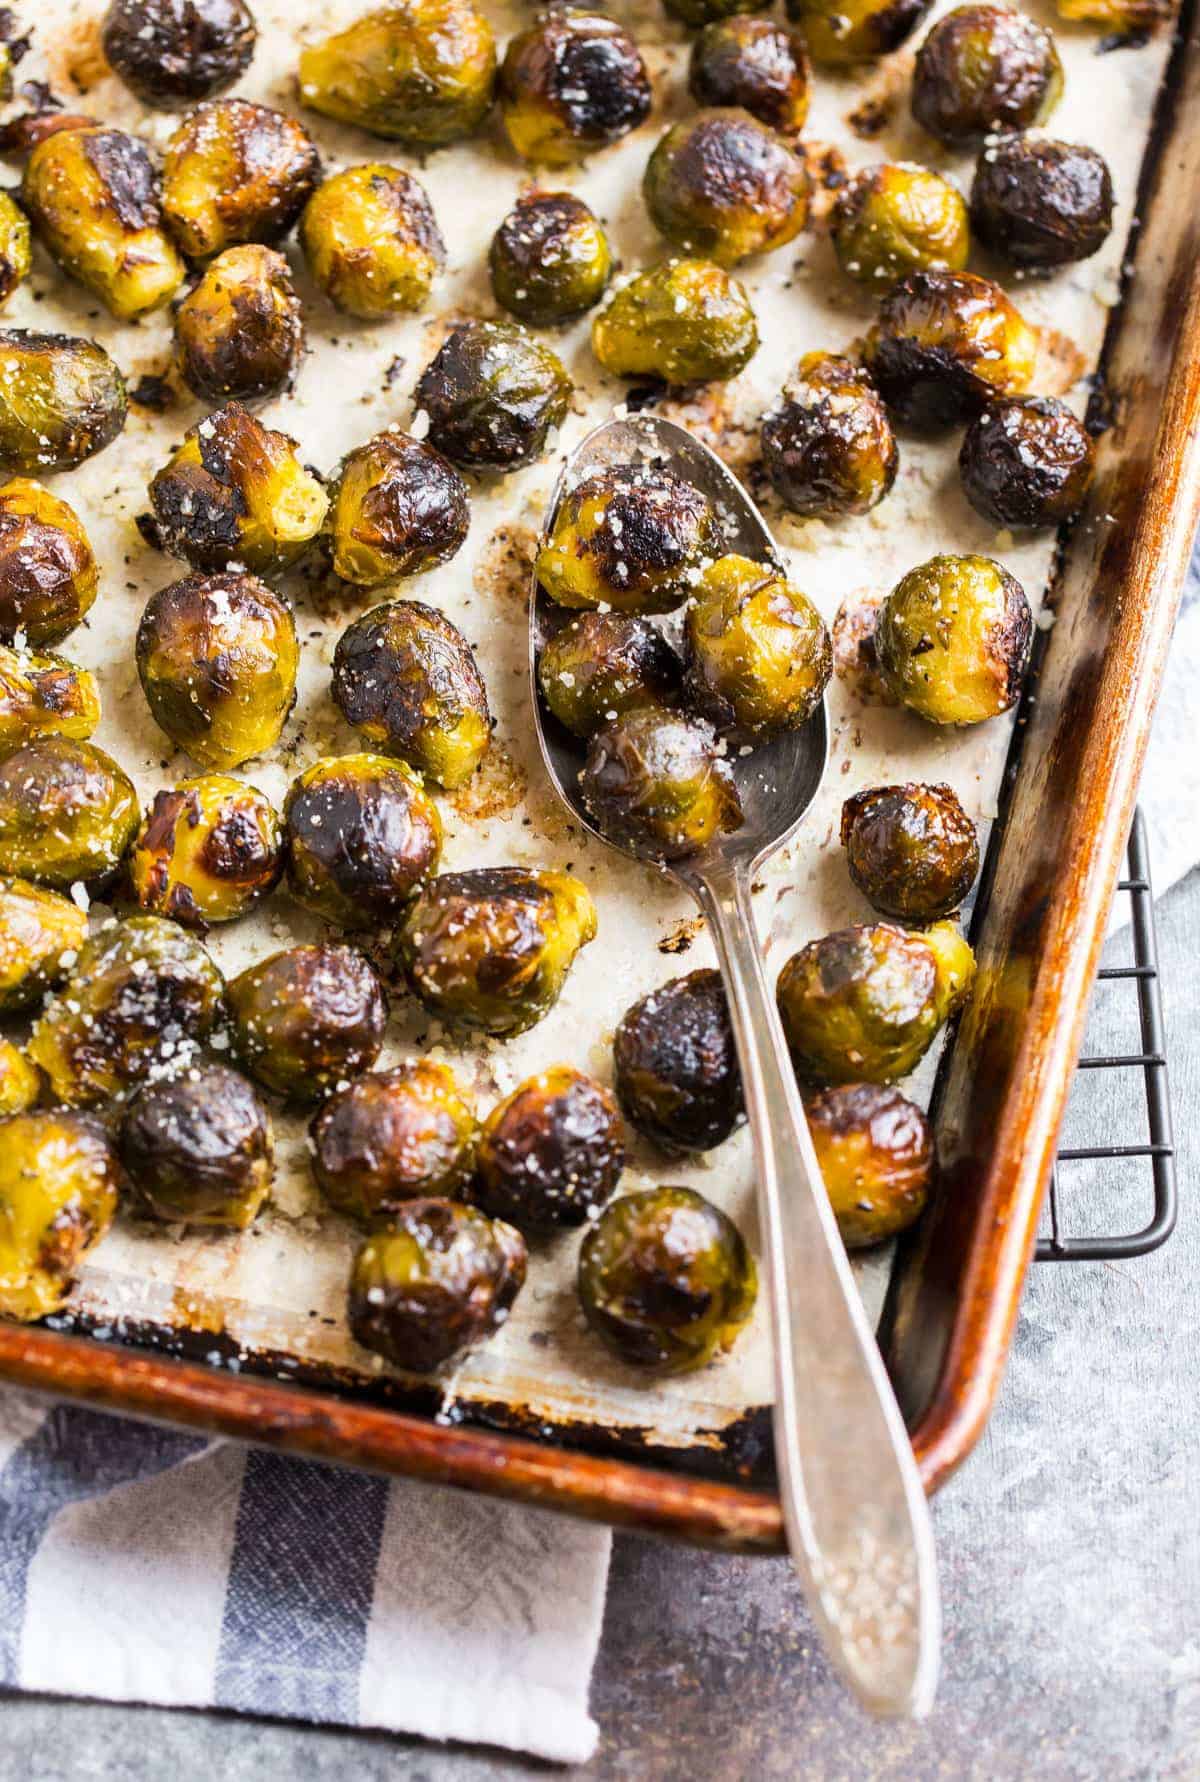 Roasted frozen brussels sprouts